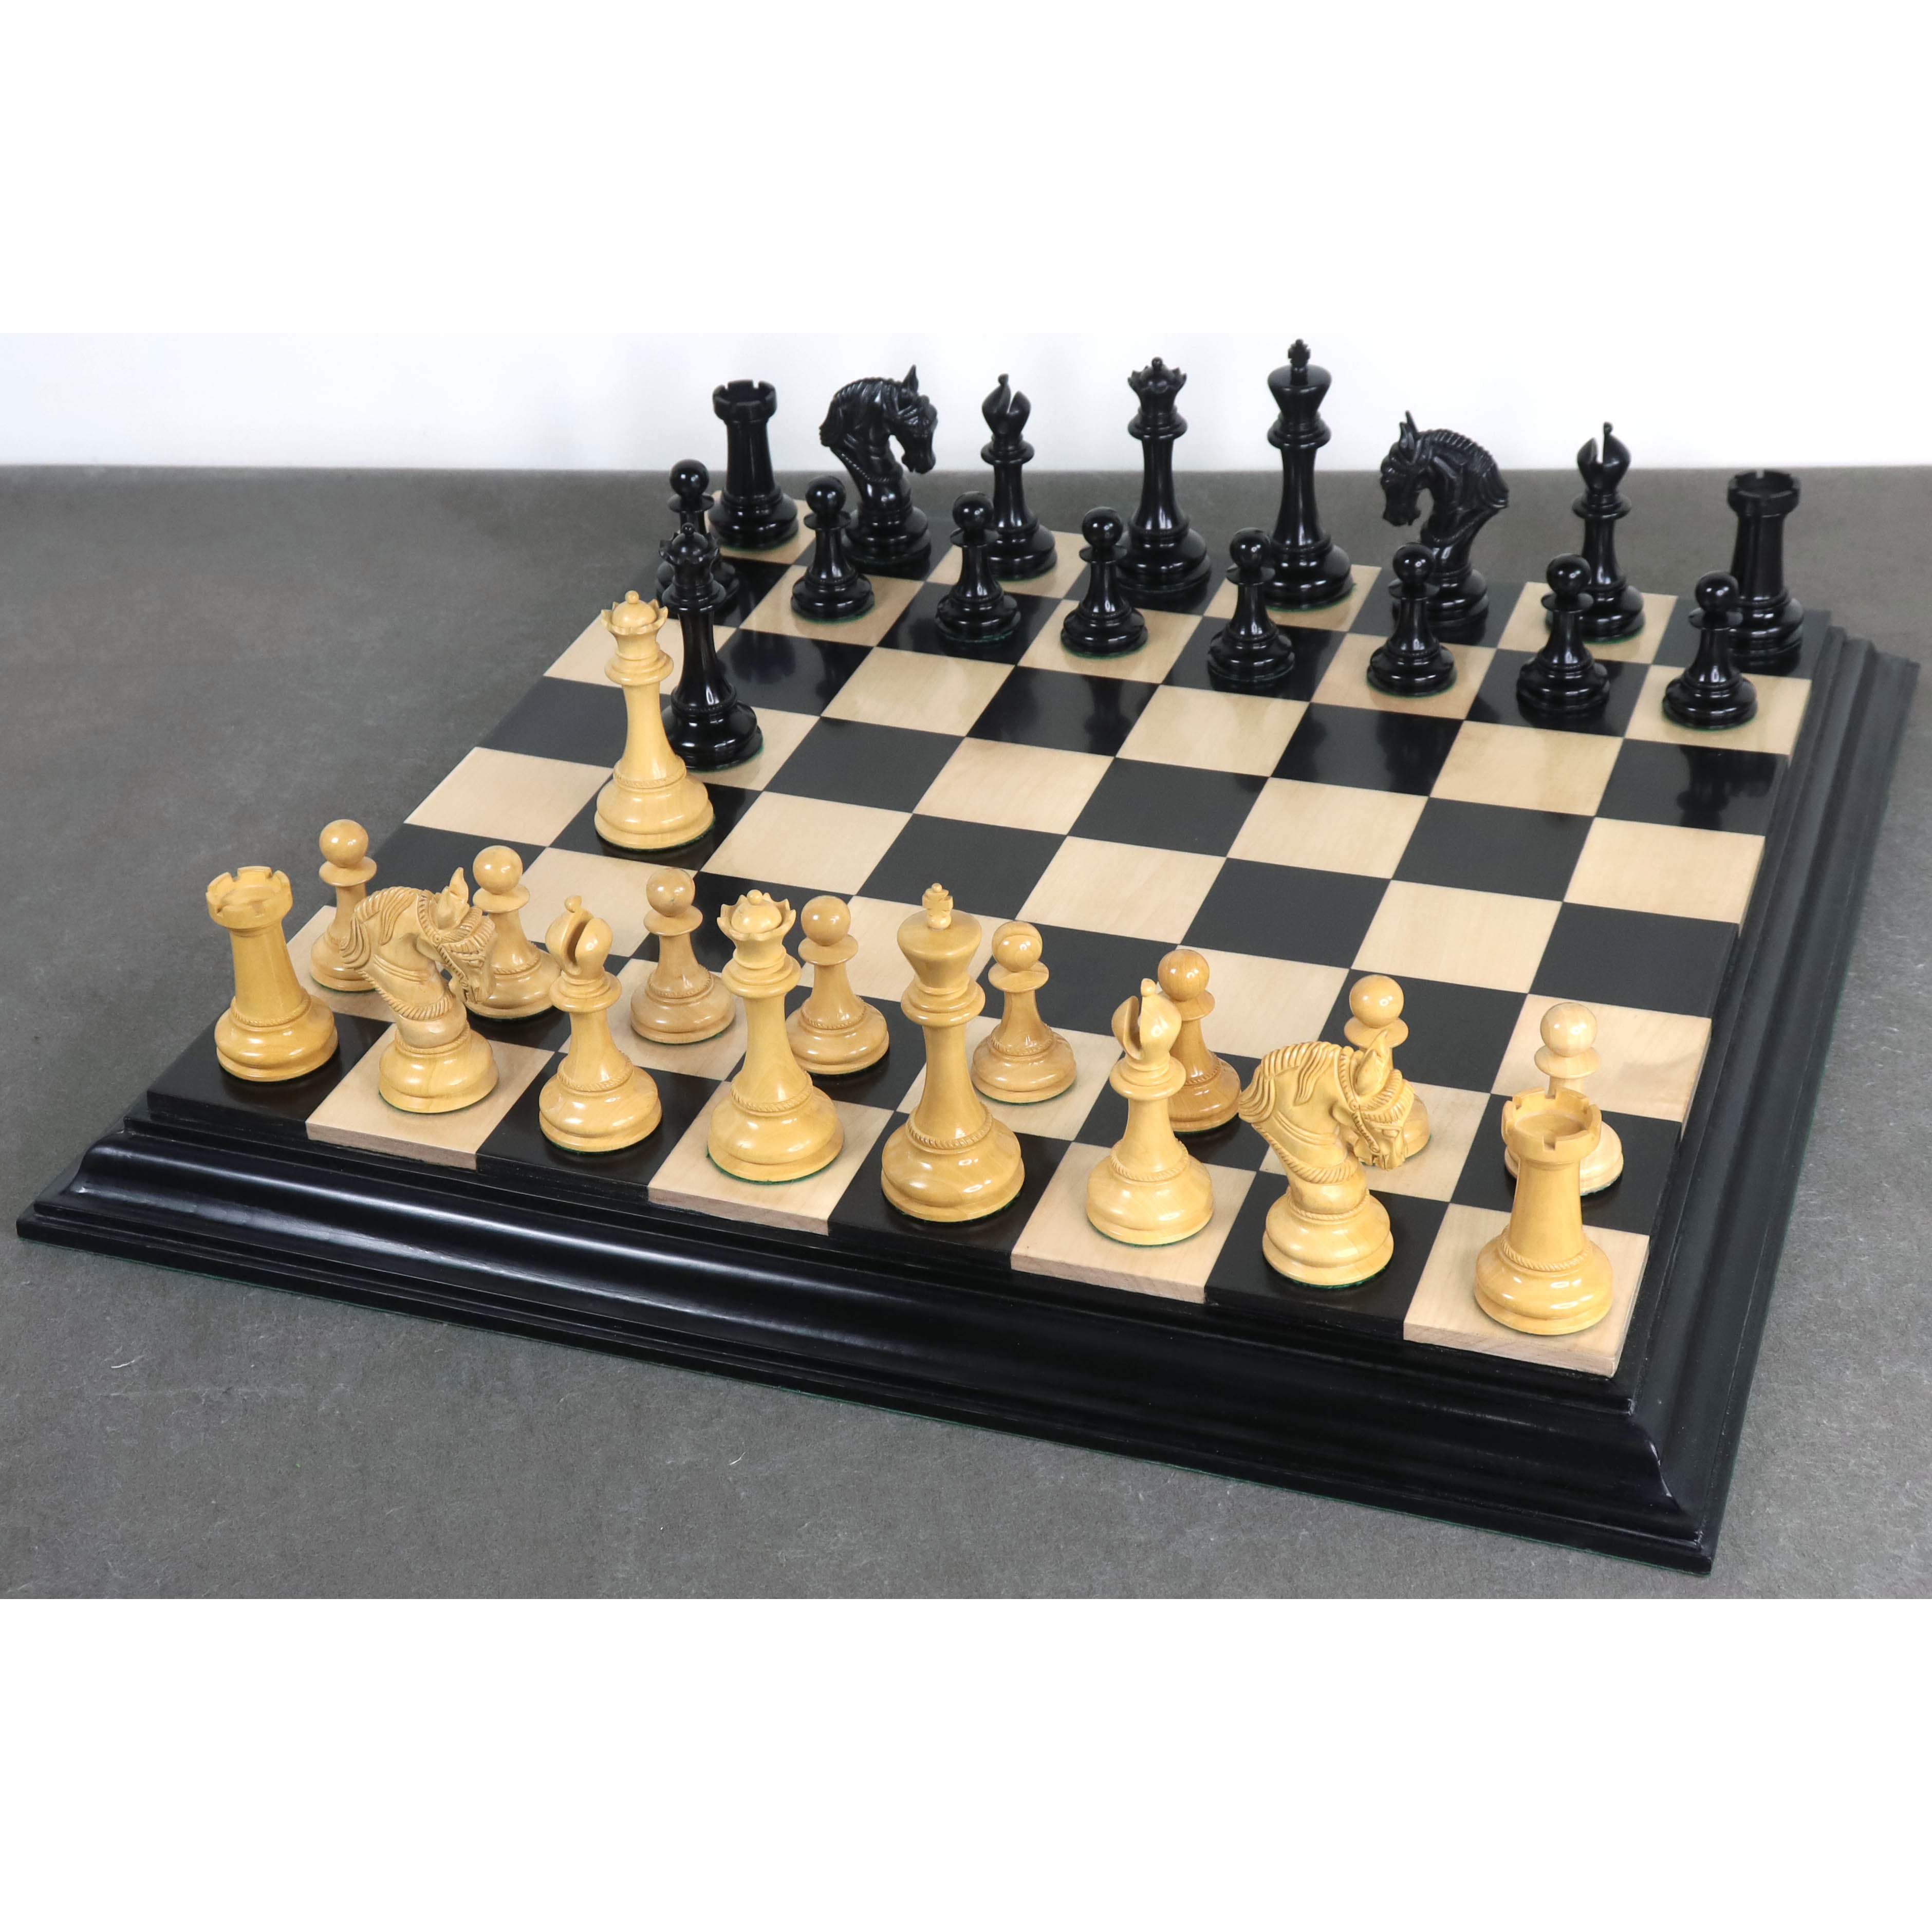 4.5" Imperator Luxury Chess Set Combo - Pieces in Ebony Wood with 23" Chess board